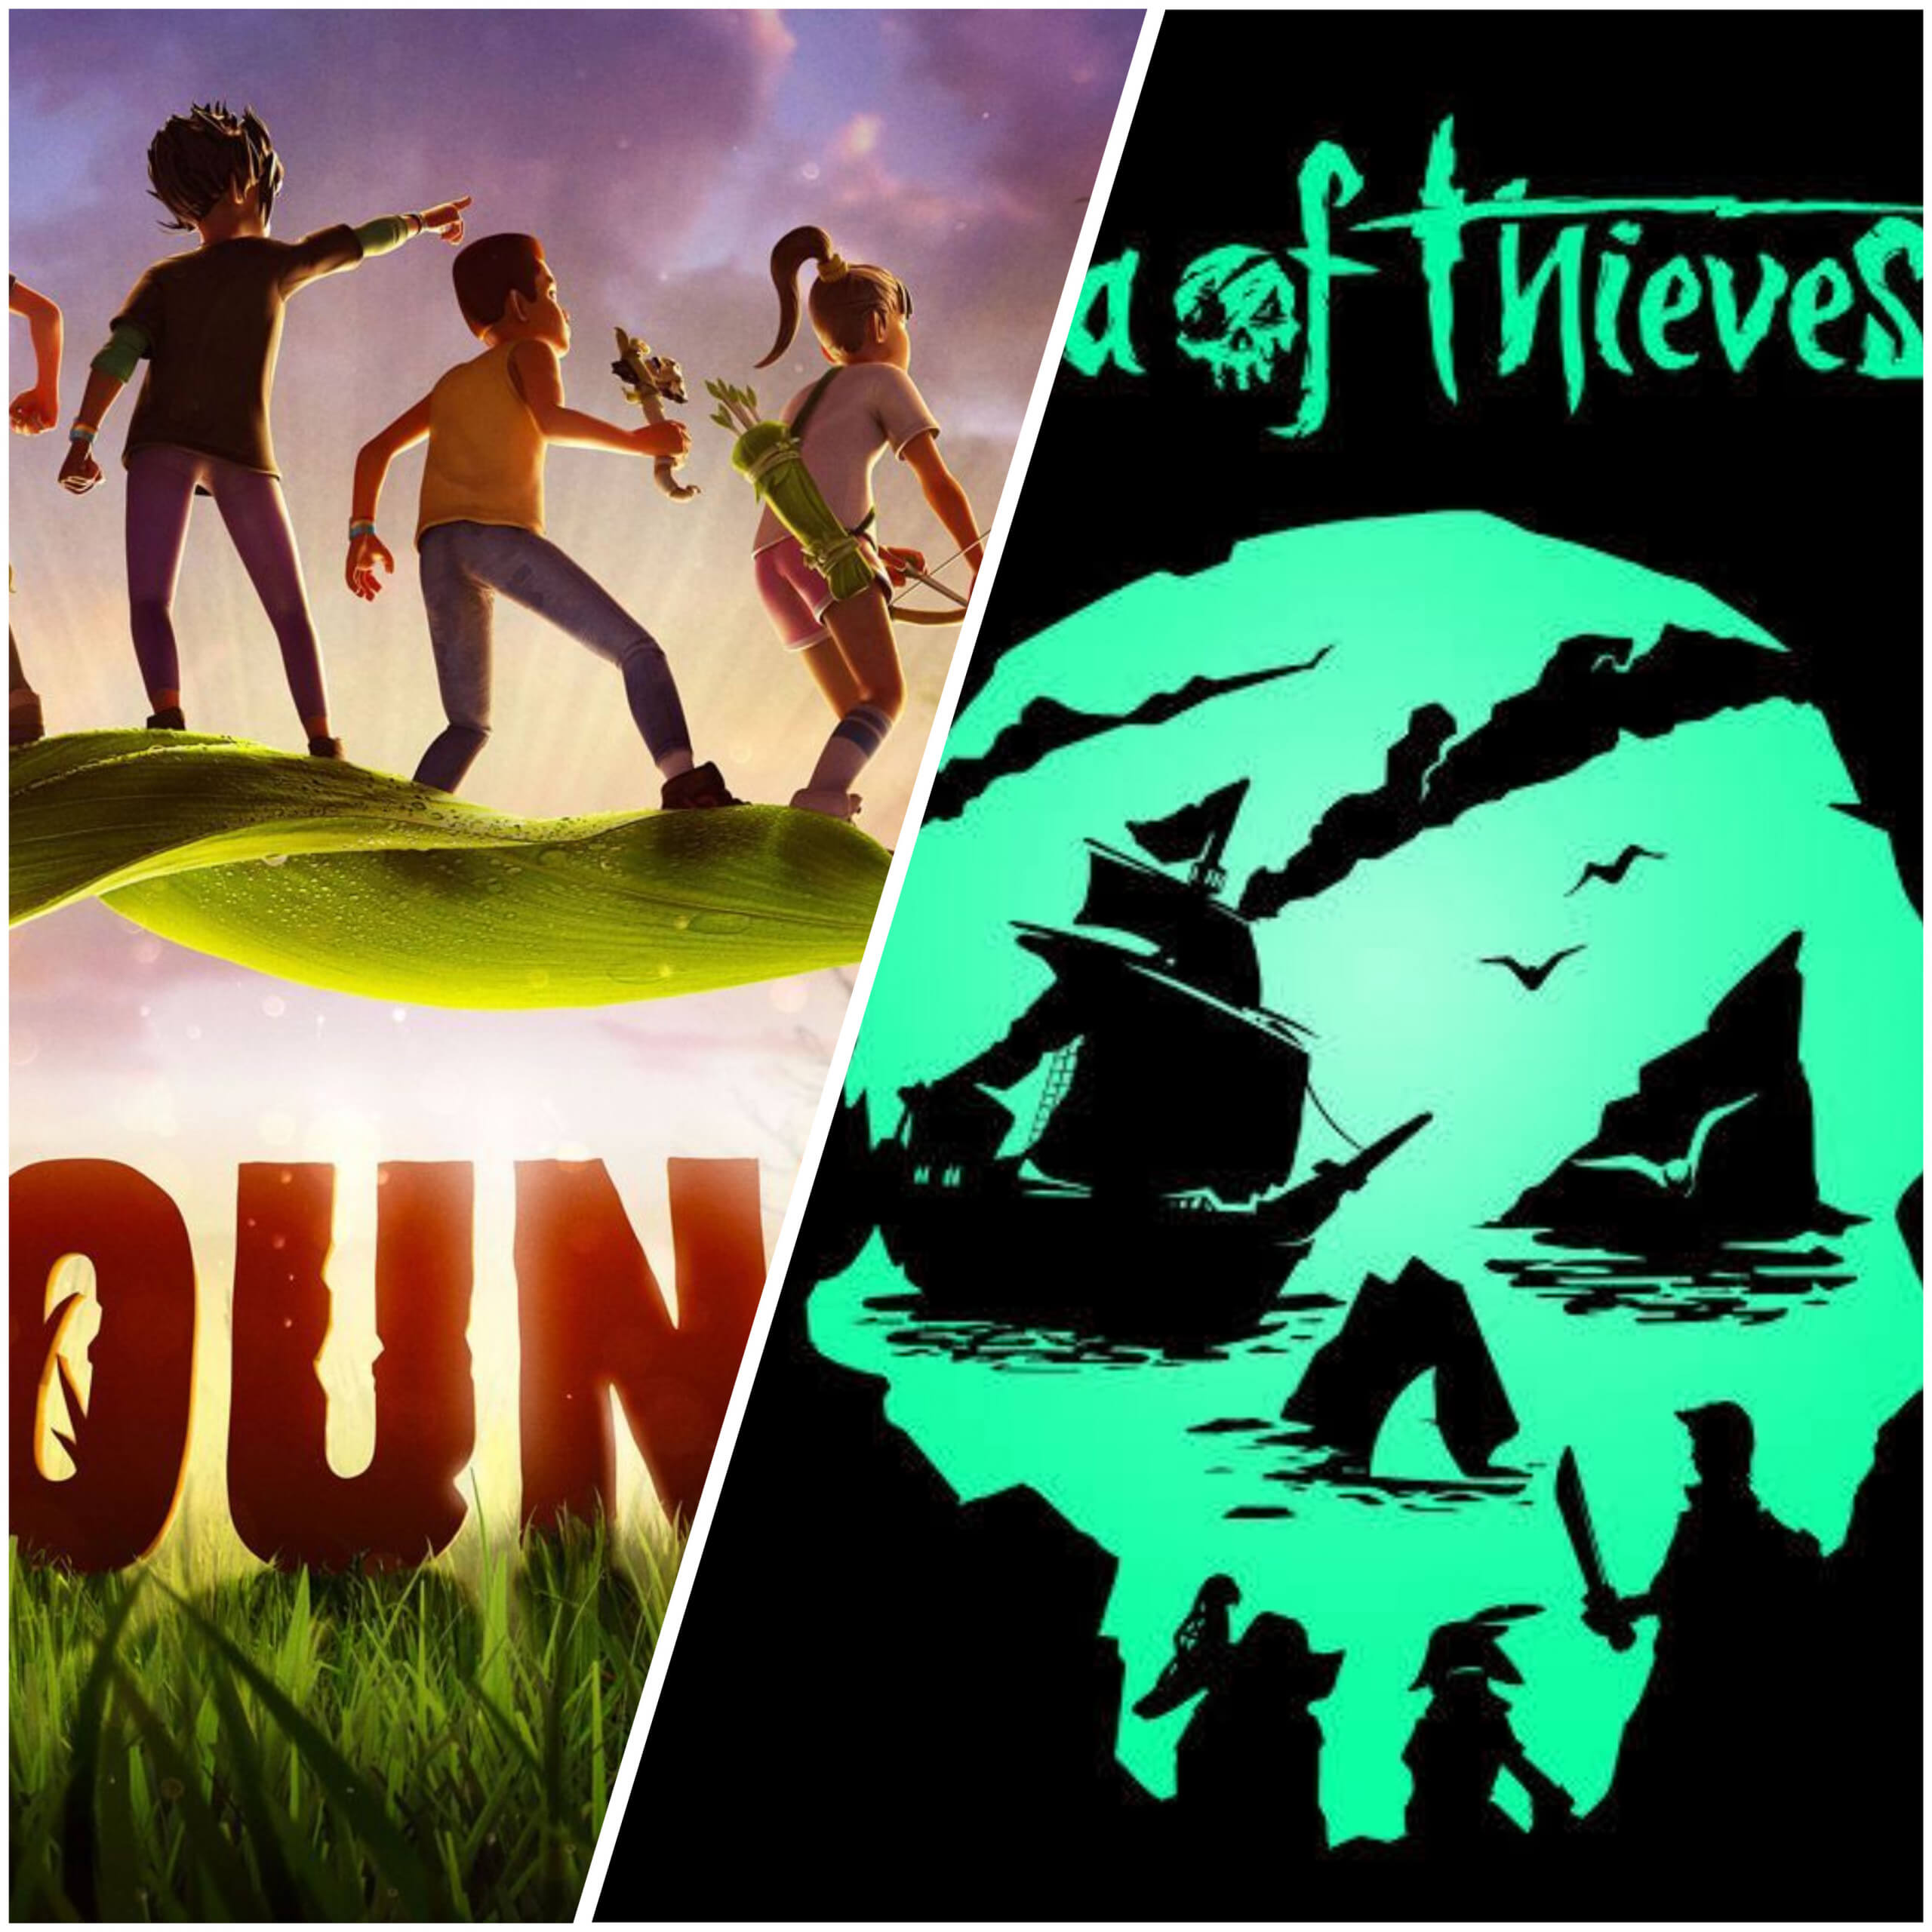 The cover art for grounded and sea of thieves next to eachother, grounded showing 4 kids standing on a leaf, showing they shrunk. Sea of thieves being a skull with pirate ships representing the eyes.